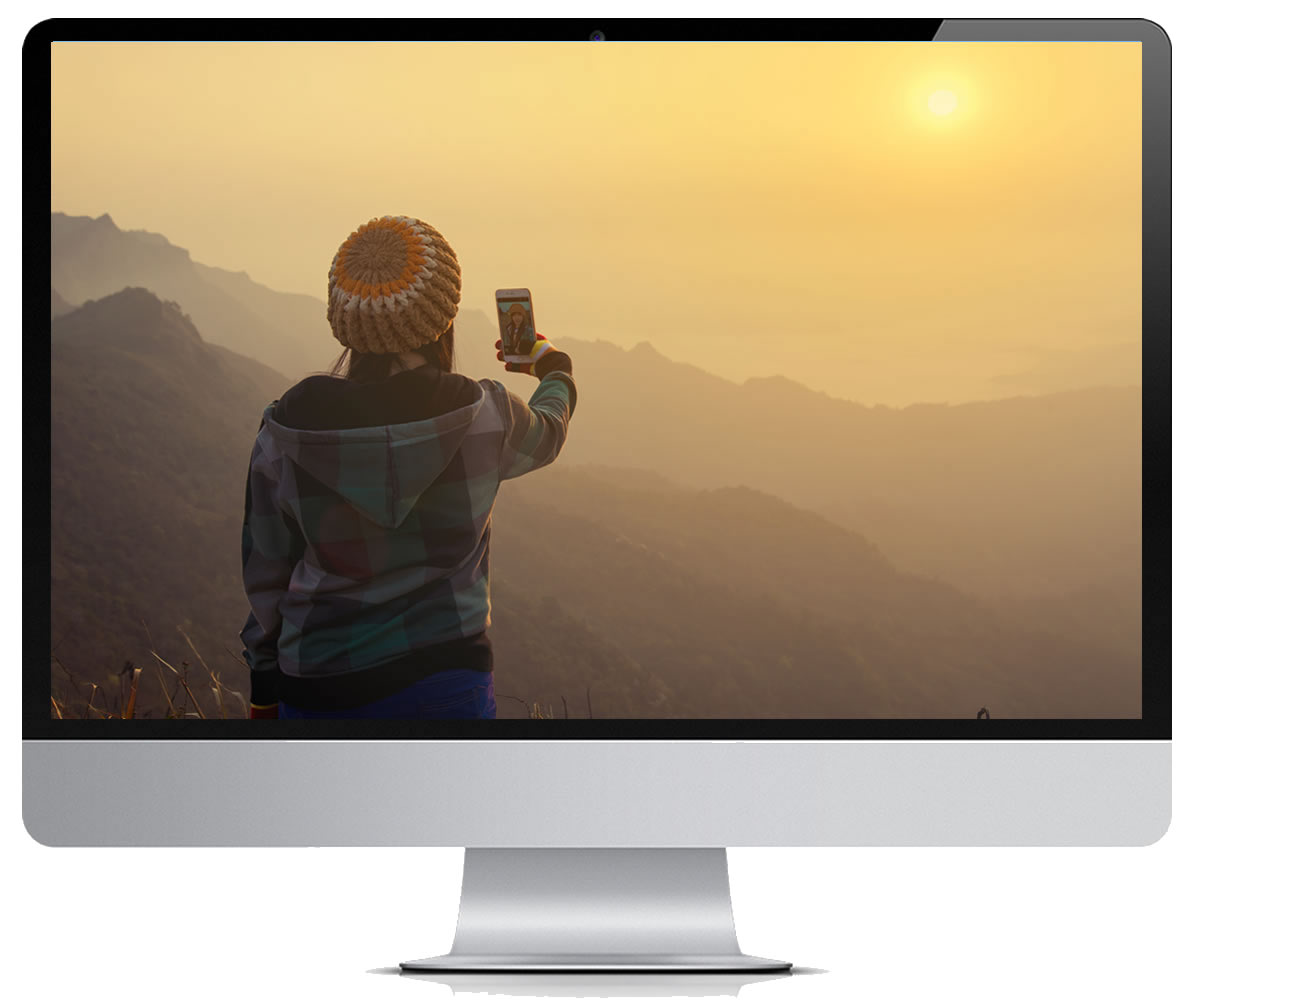 Computer Monitor with a person taking a picture of a sunset over a maountainscape